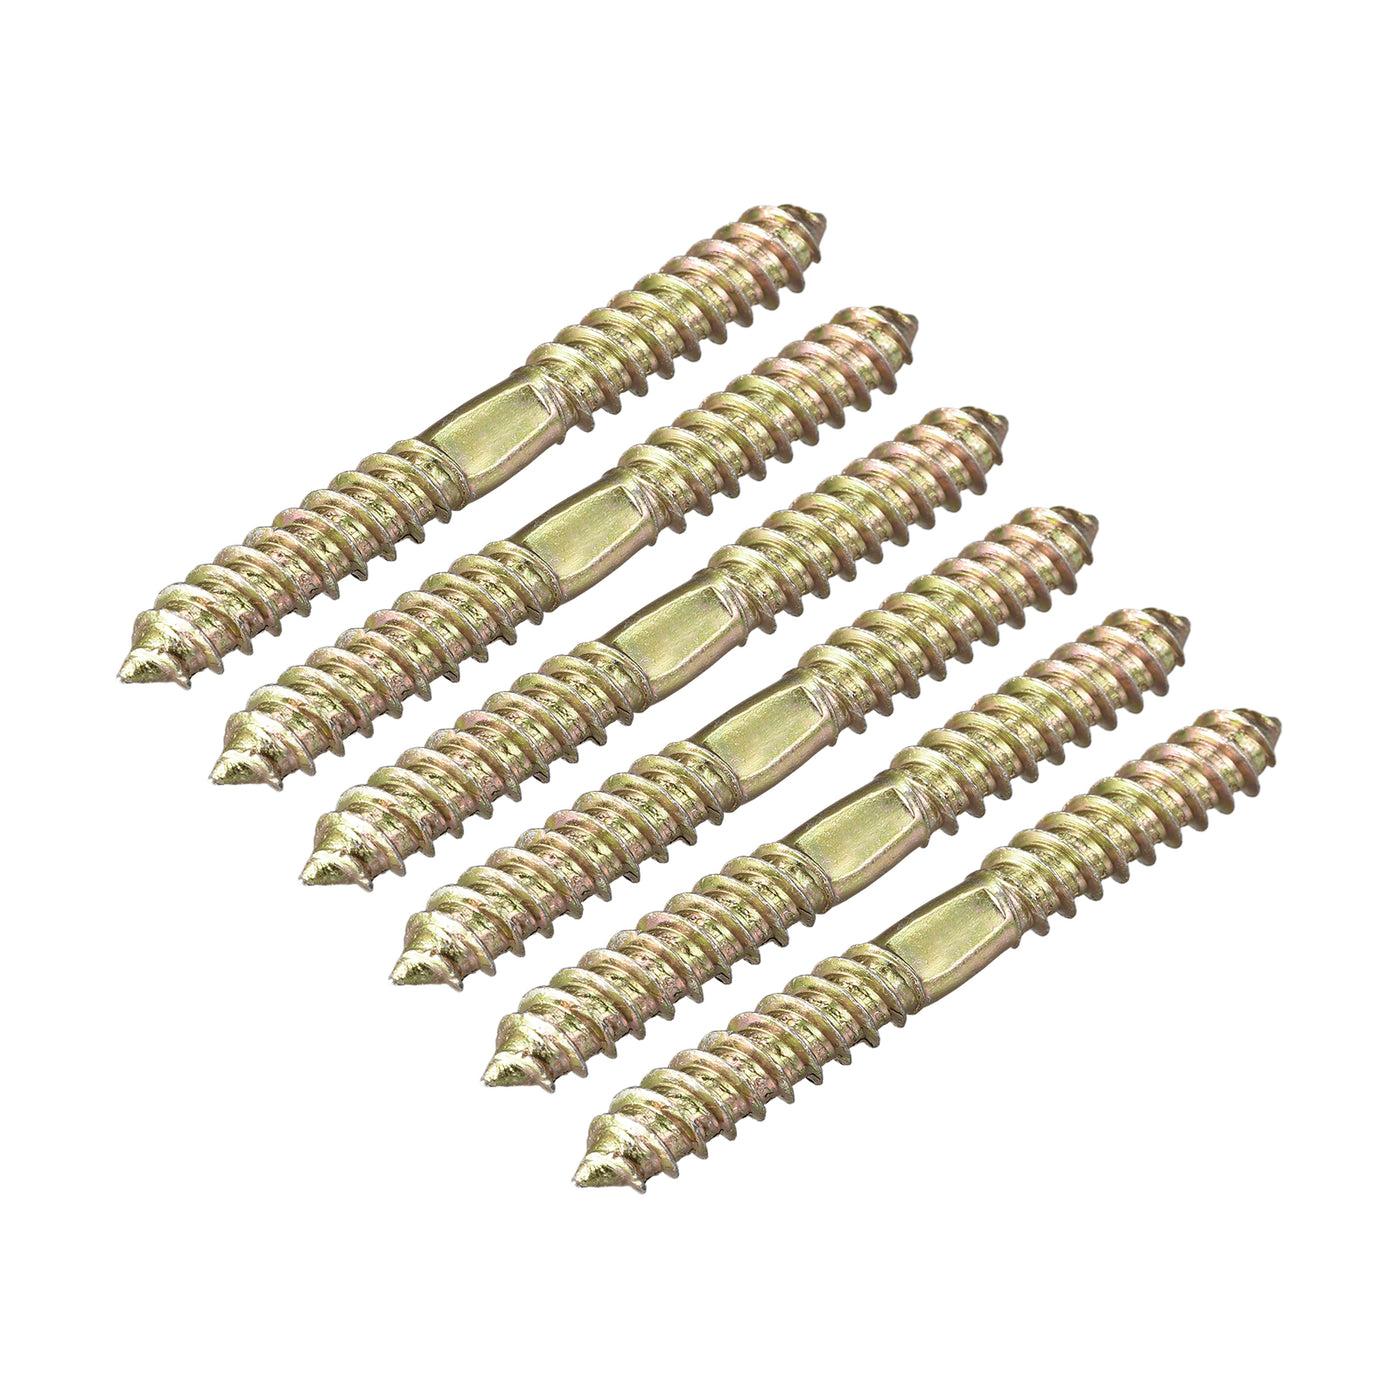 Uxcell Uxcell 8x26mm Hanger Bolts, 6pcs Double Ended Self-Tapping Thread Dowel Screws